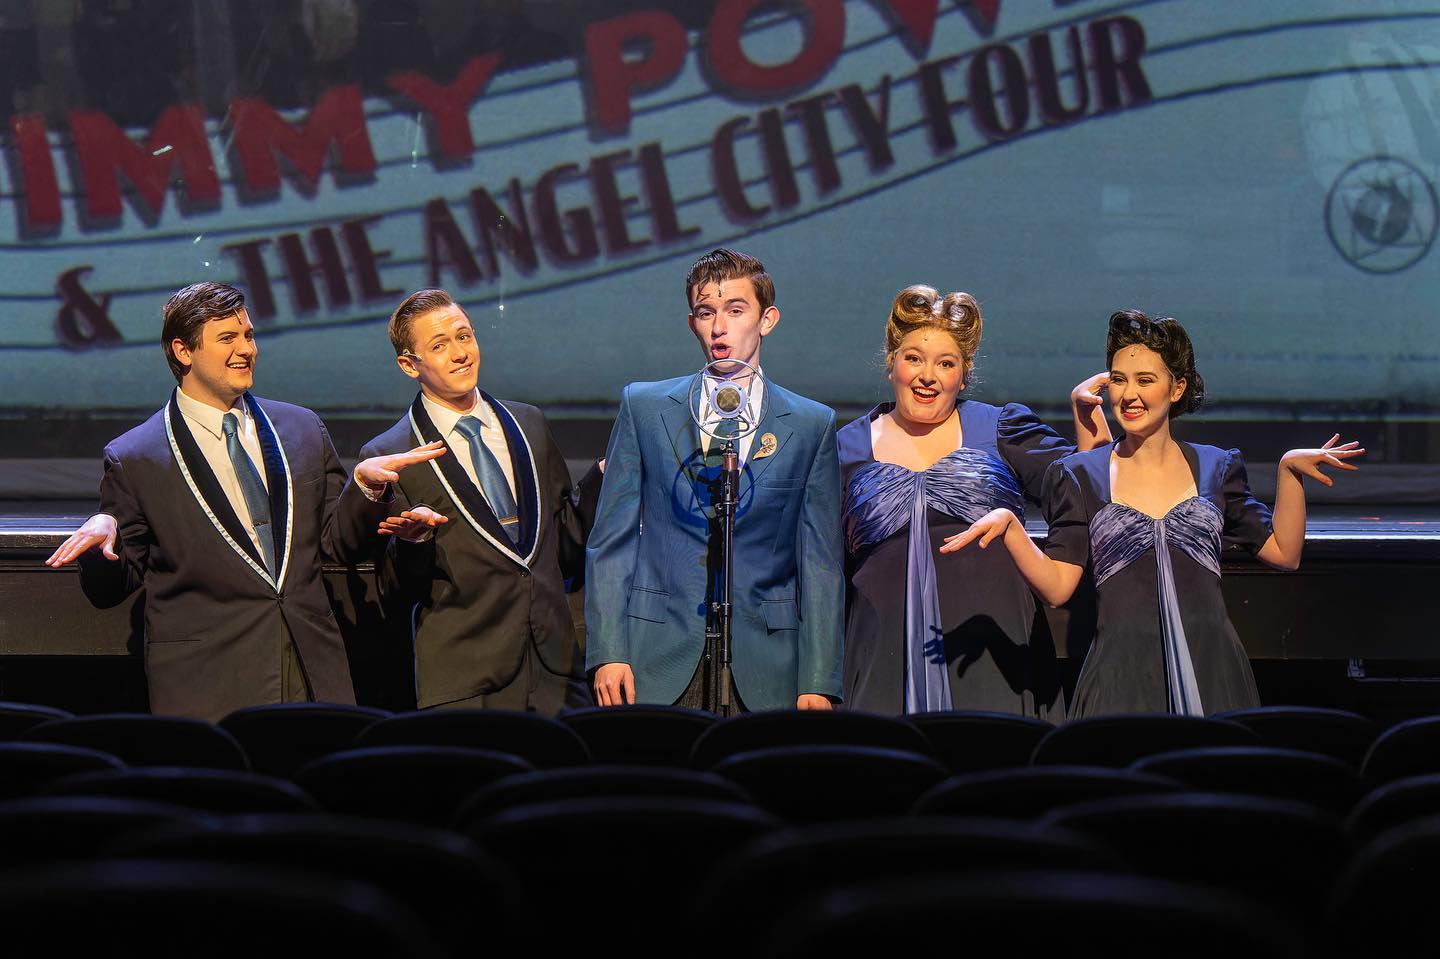 City of Angels opens at the Virginia Theatre